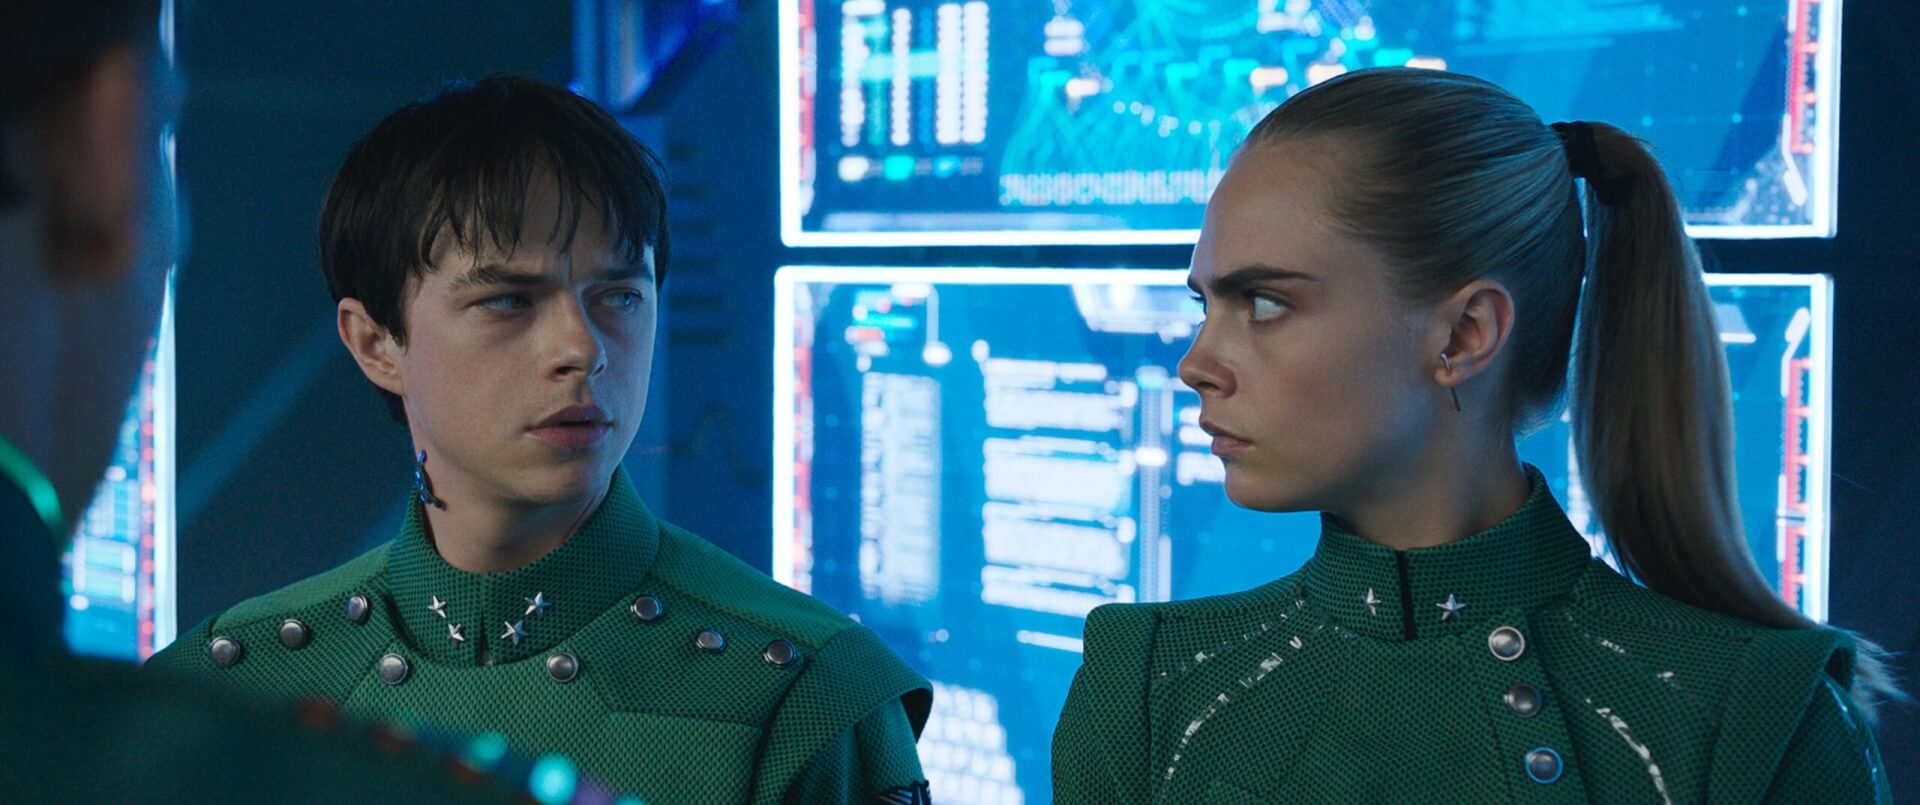 VALERIAN AND THE CITY OF A THOUSAND PLANETS Dane DeHaan Cara Delevingne